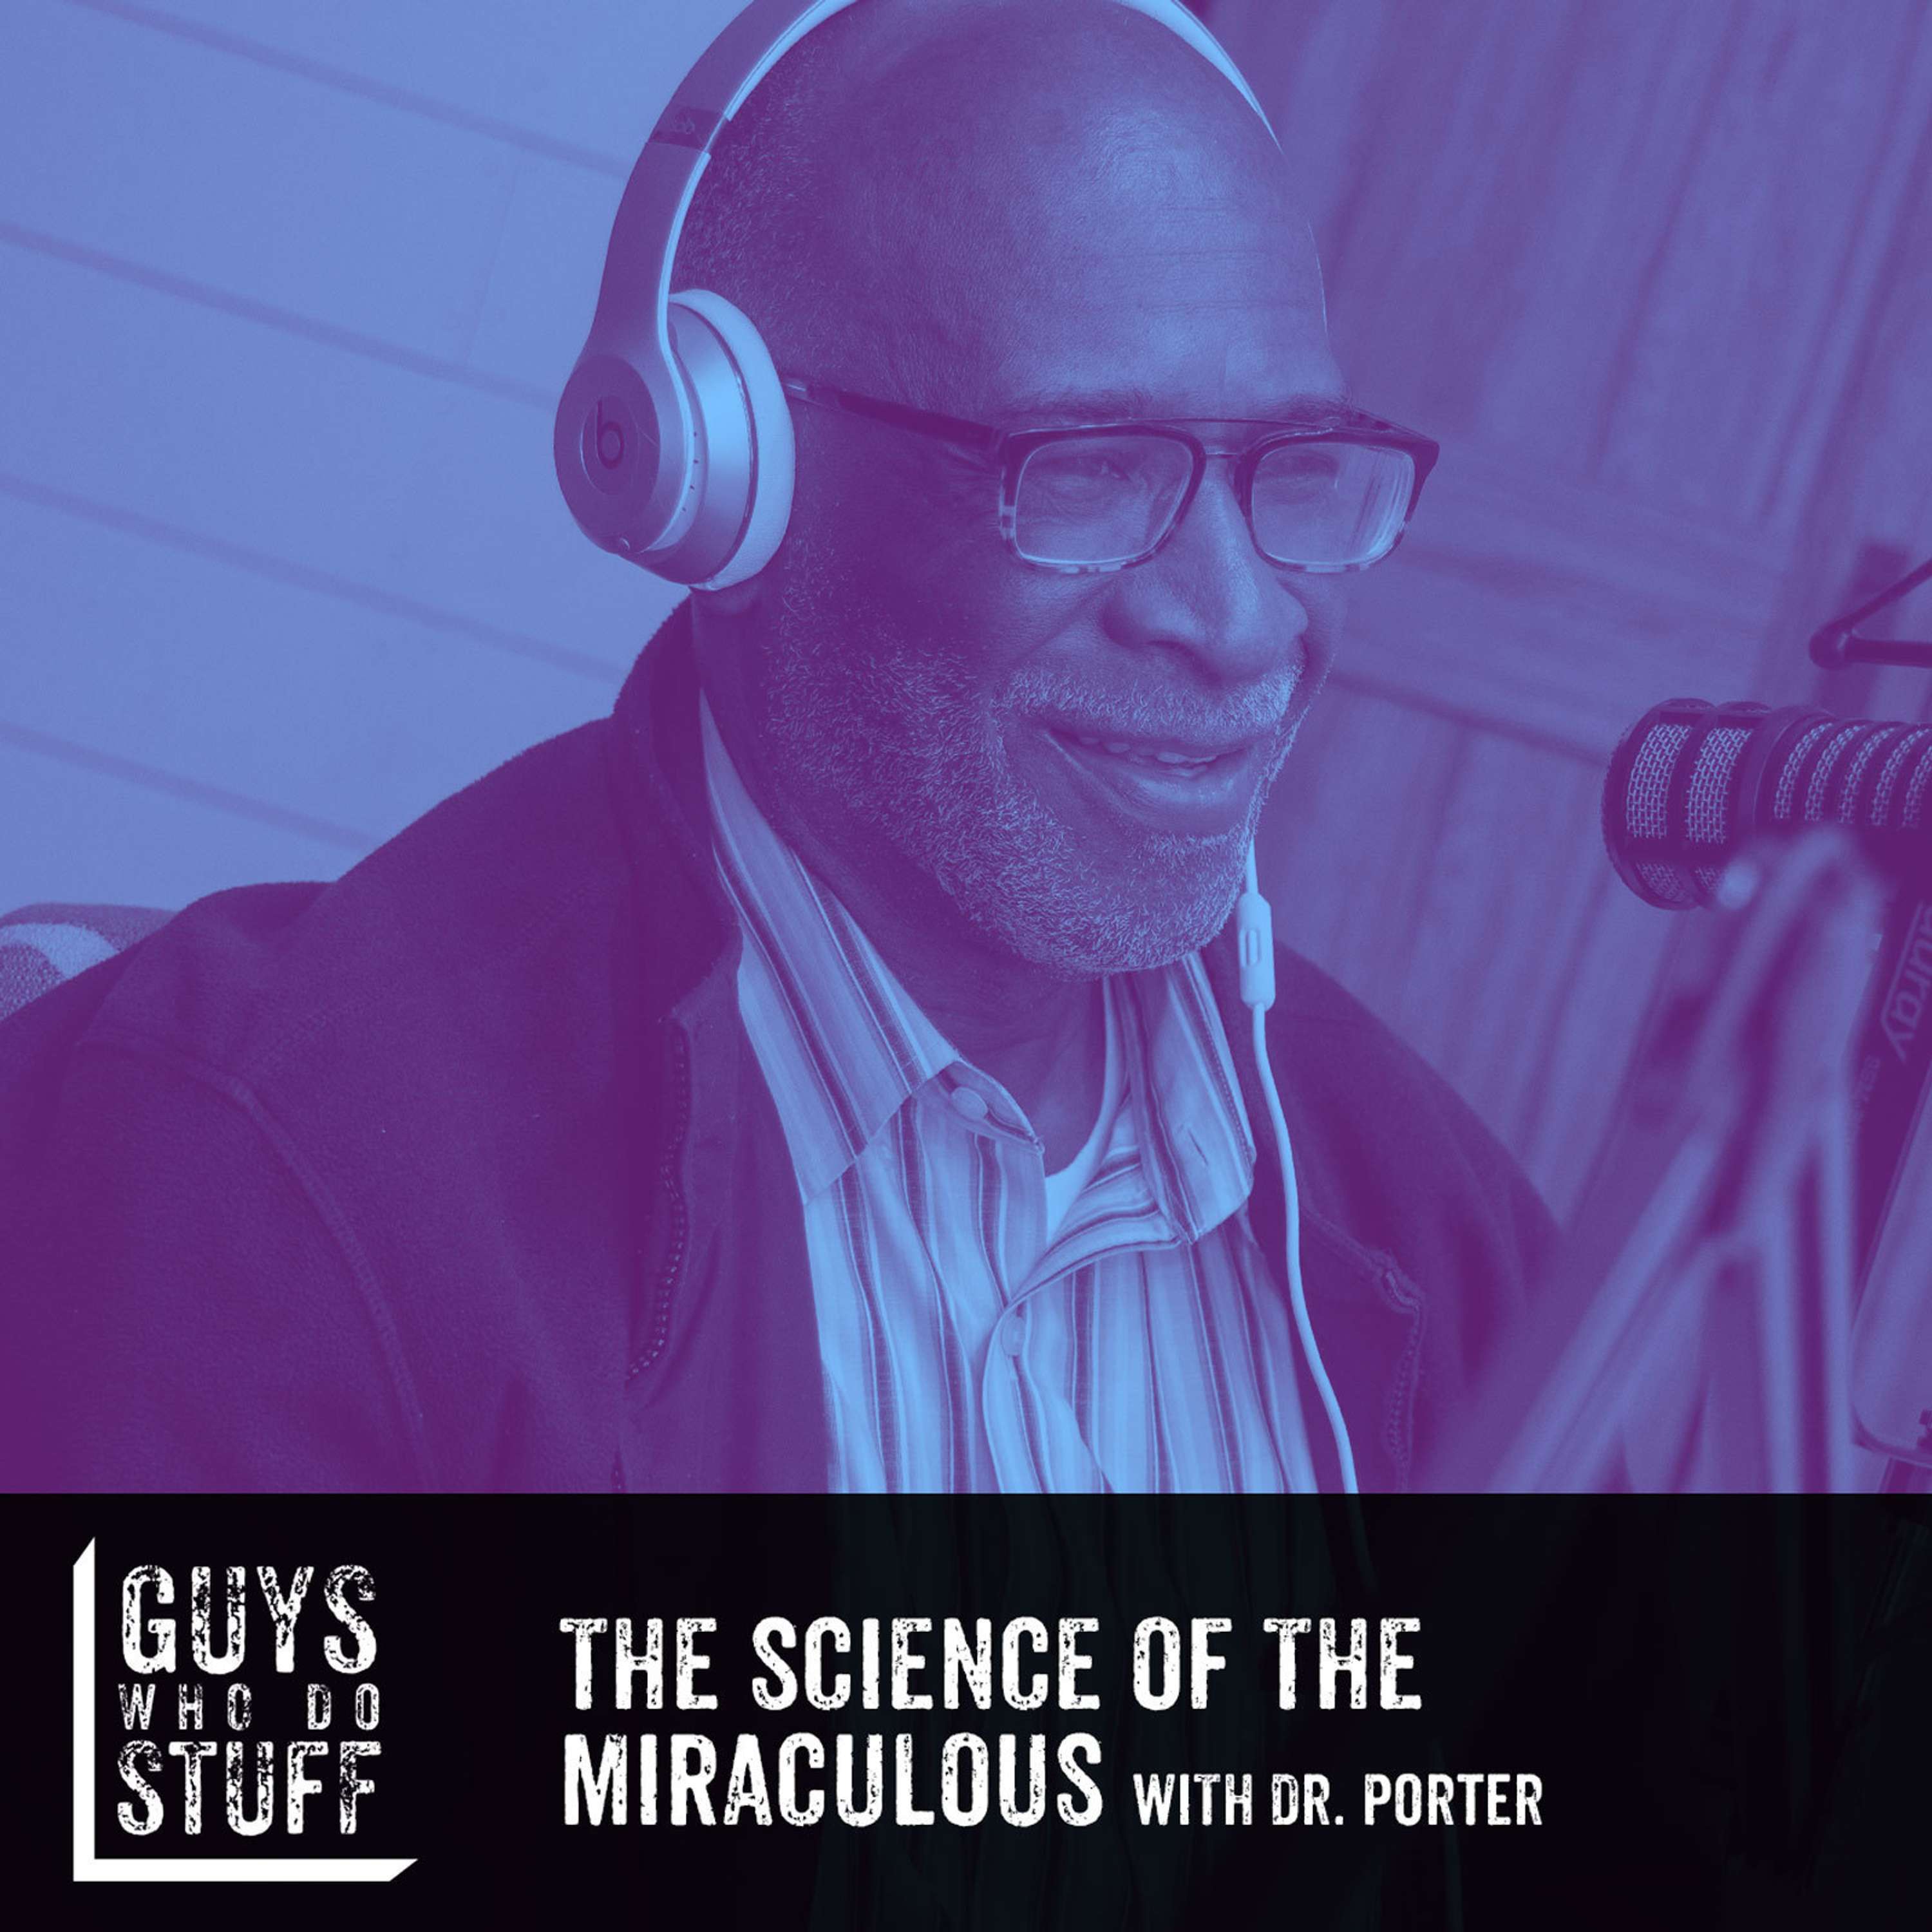 The Science of the Miraculous with Dr. Porter